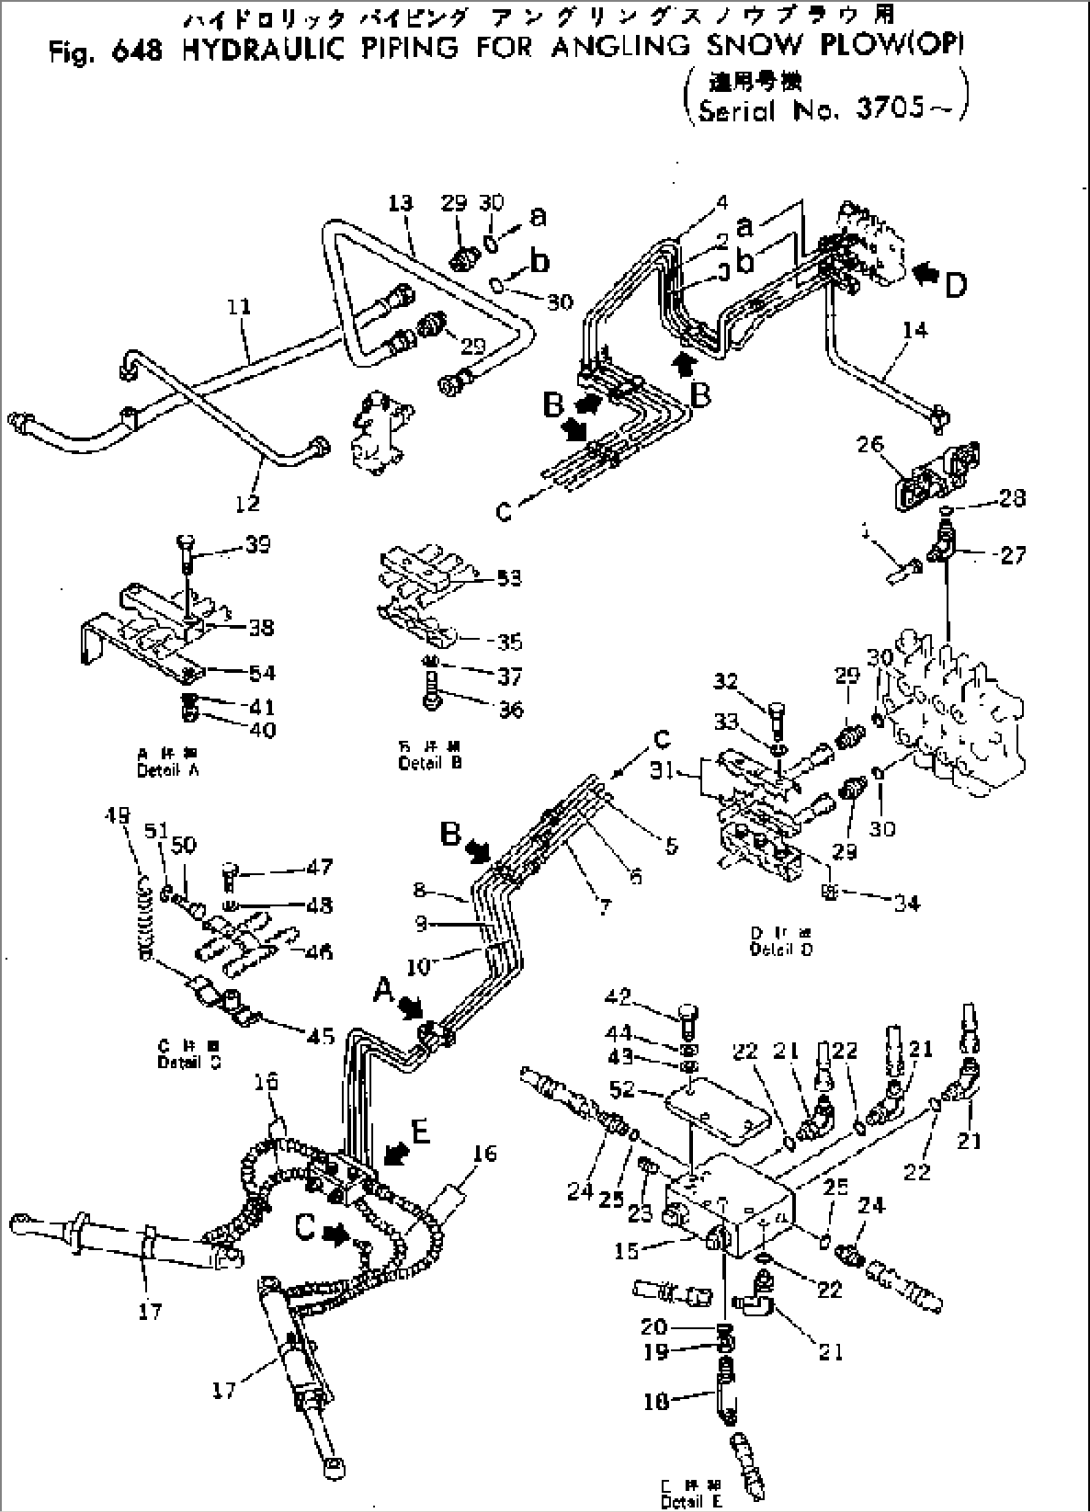 HYDRAULIC PIPING FOR ANGLING SNOW PLOW (OP)(#3705-)